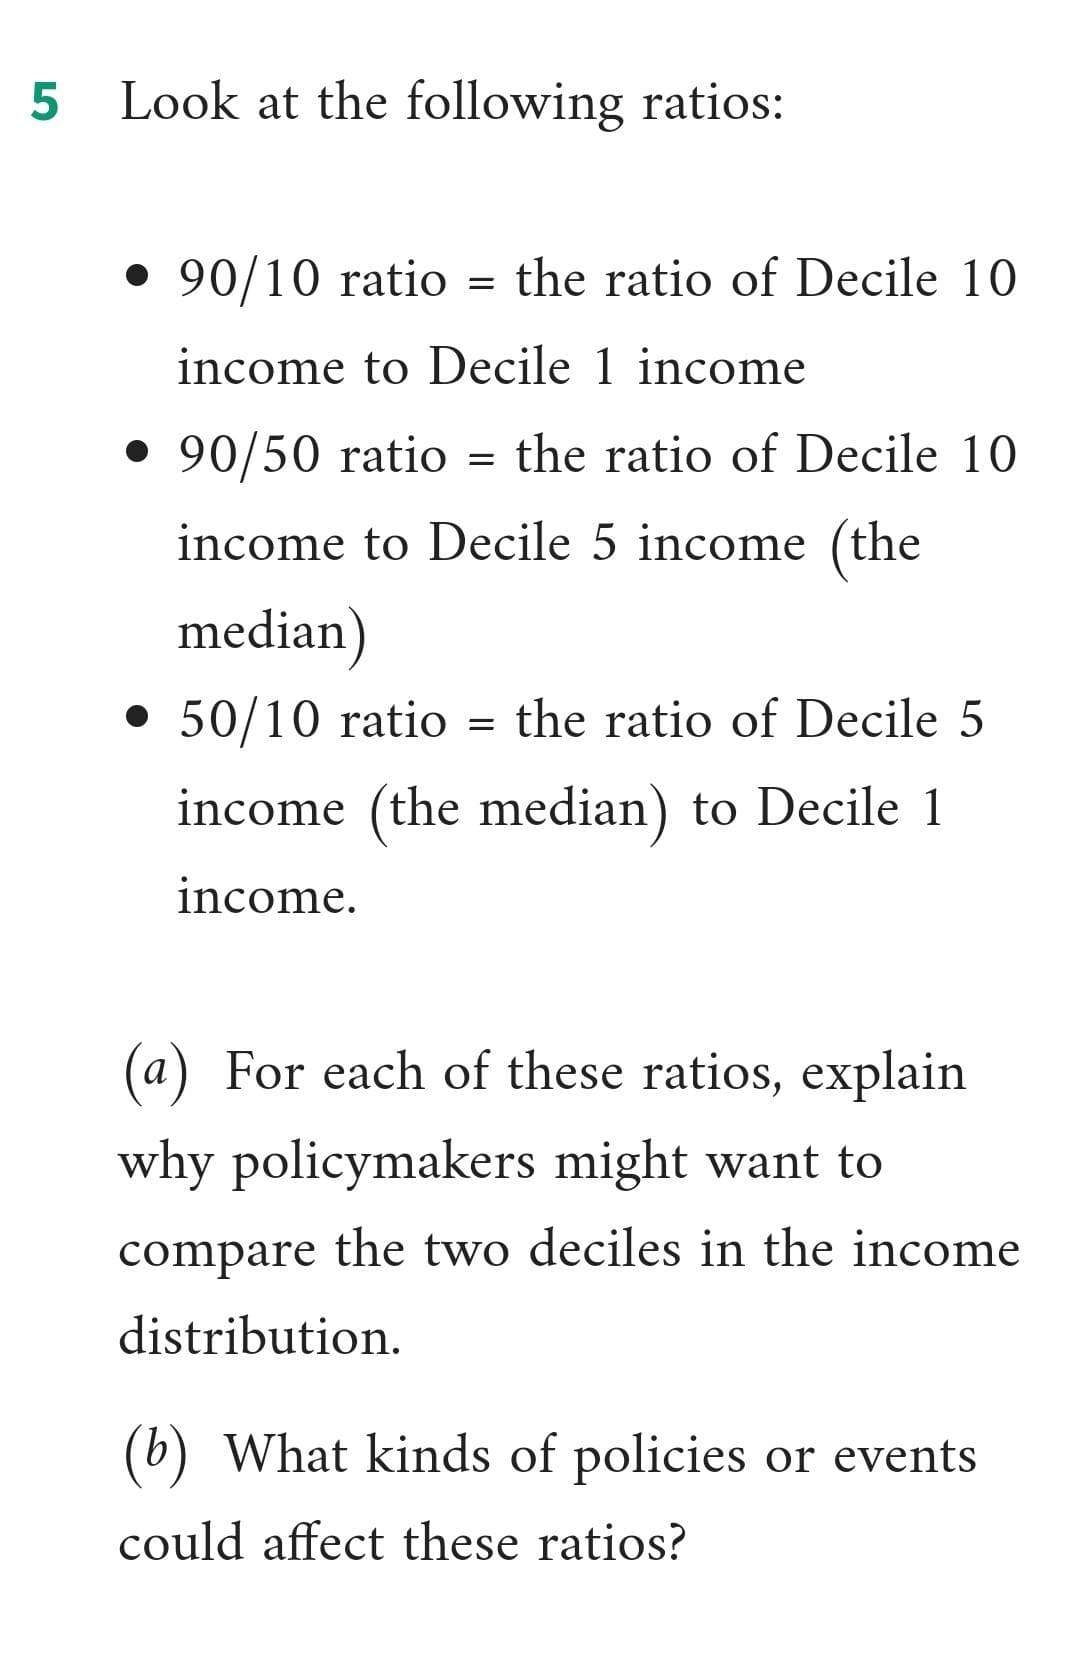 Look at the following ratios:
• 90/10 ratio = the ratio of Decile 10
income to Decile 1 income
• 90/50 ratio
the ratio of Decile 10
income to Decile 5 income (the
median)
• 50/10 ratio = the ratio of Decile 5
income (the median) to Decile 1
income.
(a) For each of these ratios, explain
why policymakers might want to
compare the two deciles in the income
distribution.
(b) What kinds of policies or events
could affect these ratios?
